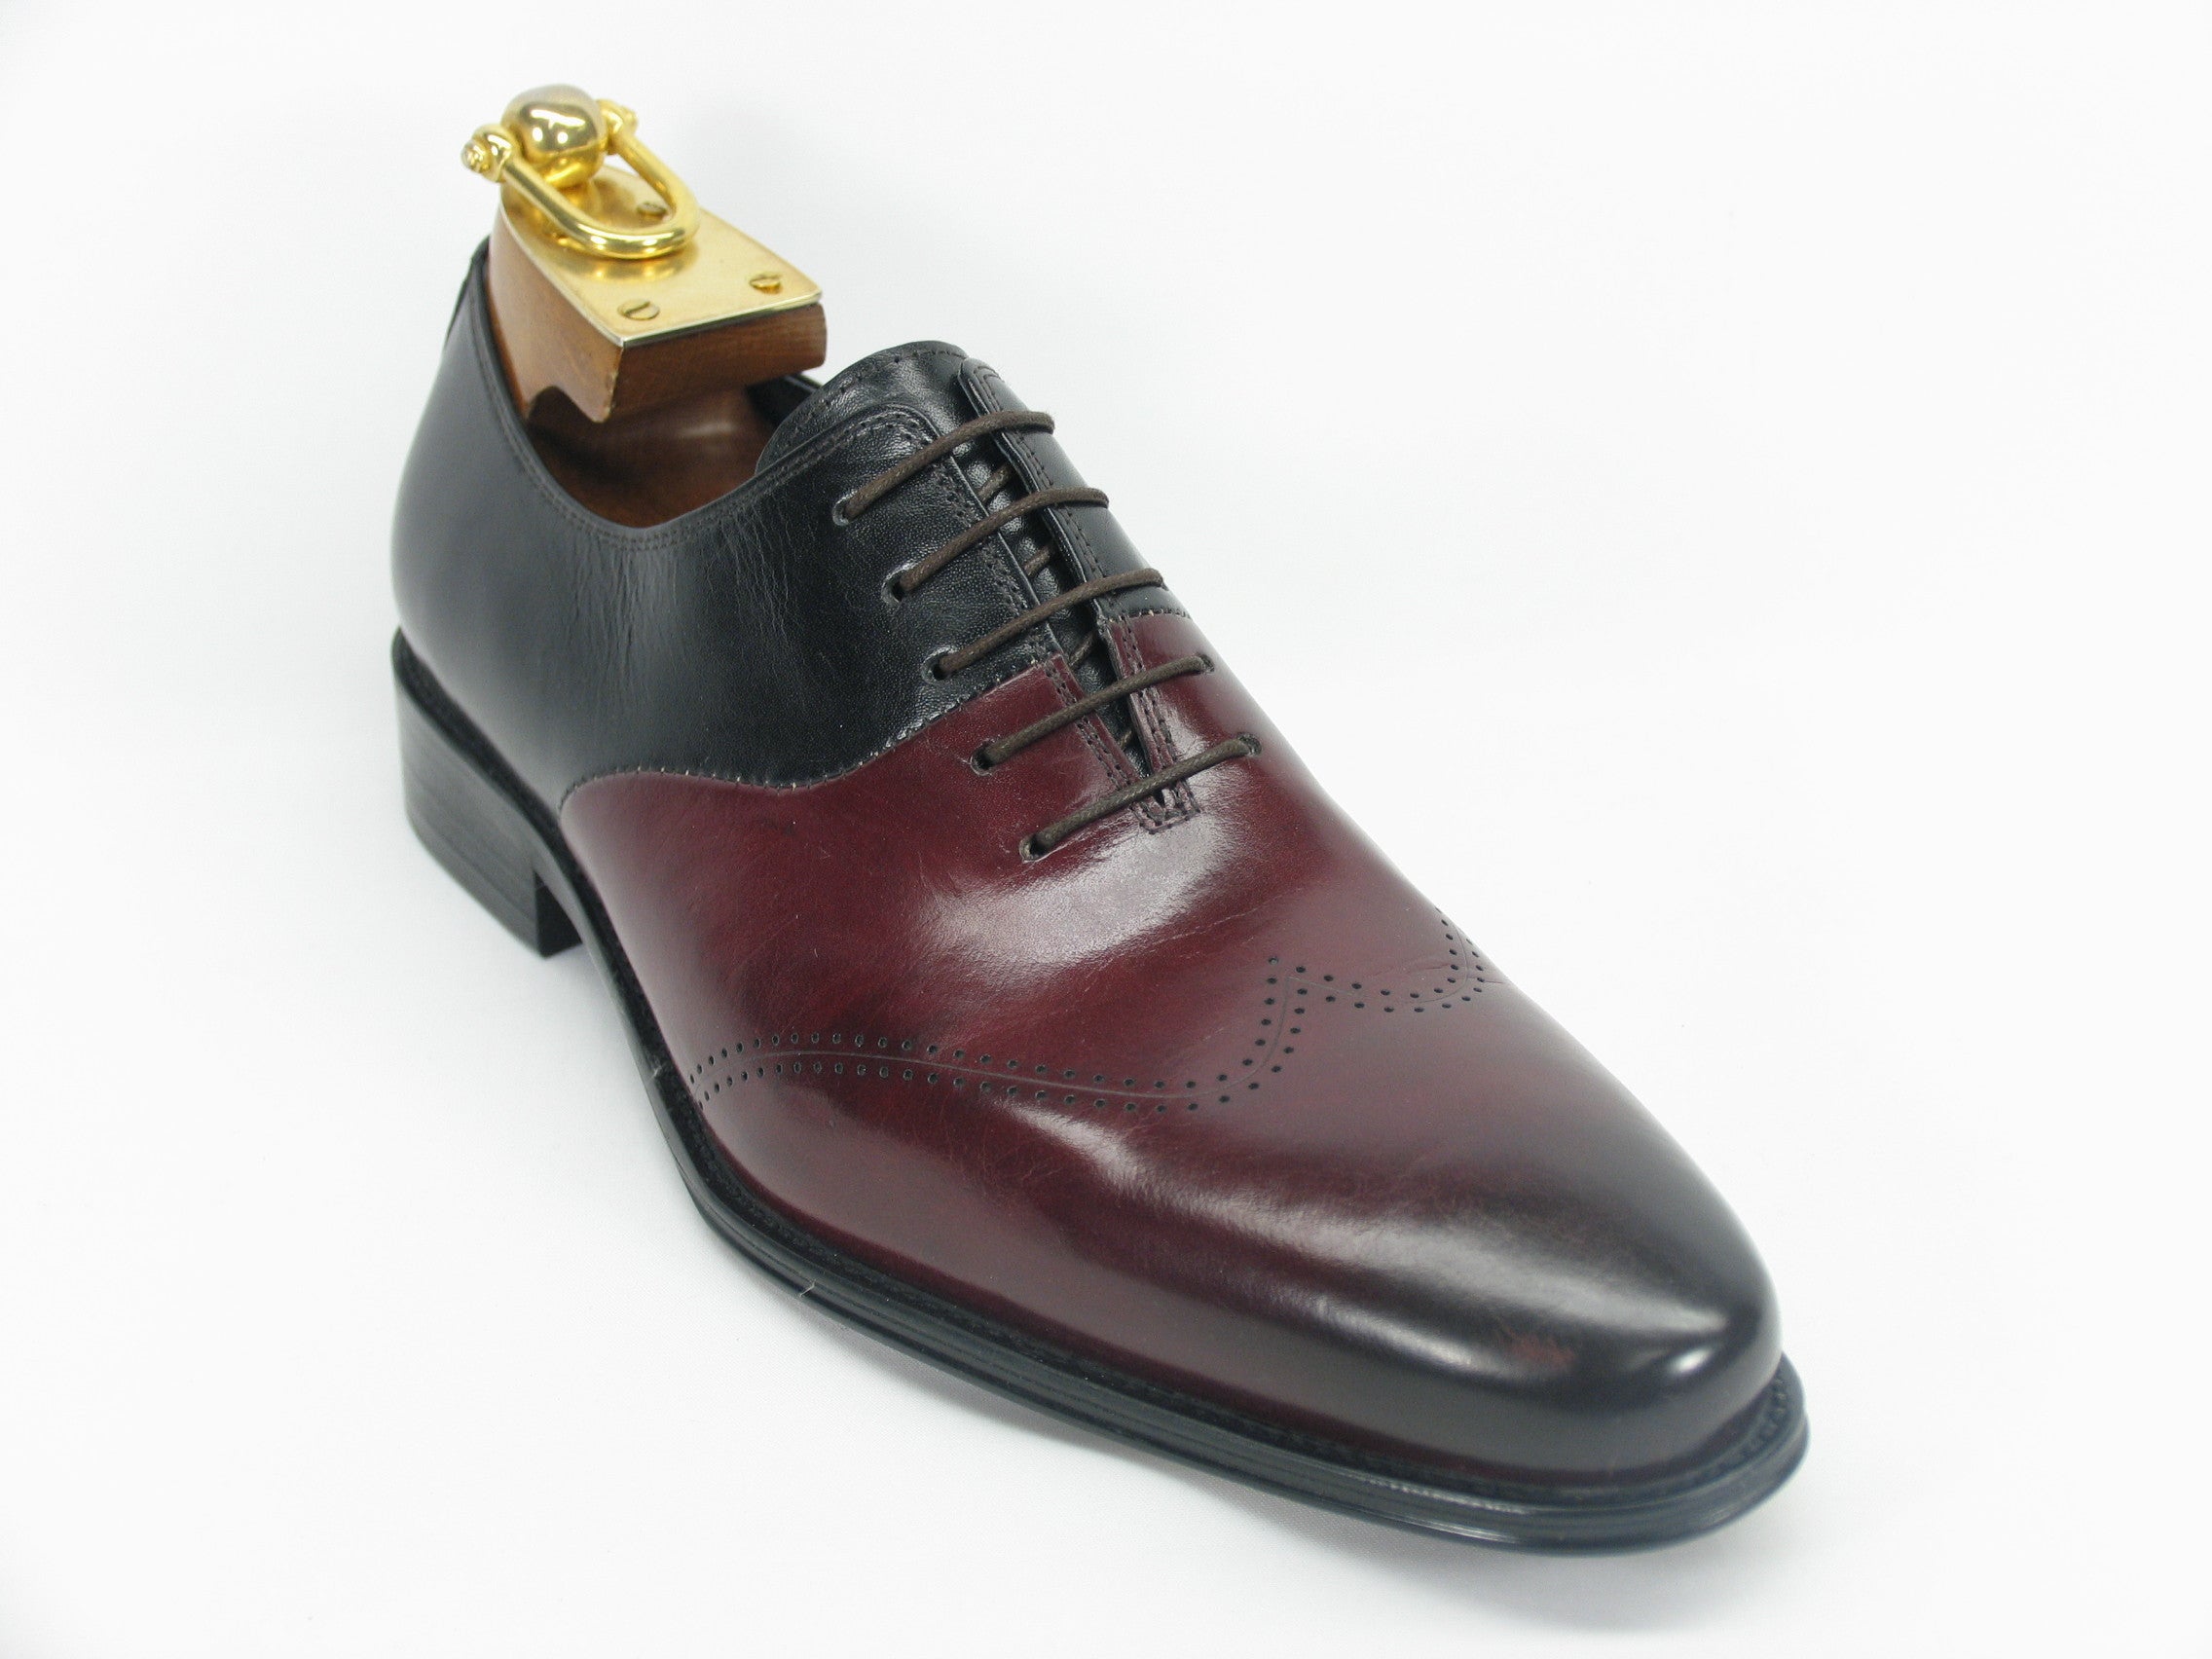 Two Tone Leather Lace-up Dress Shoe